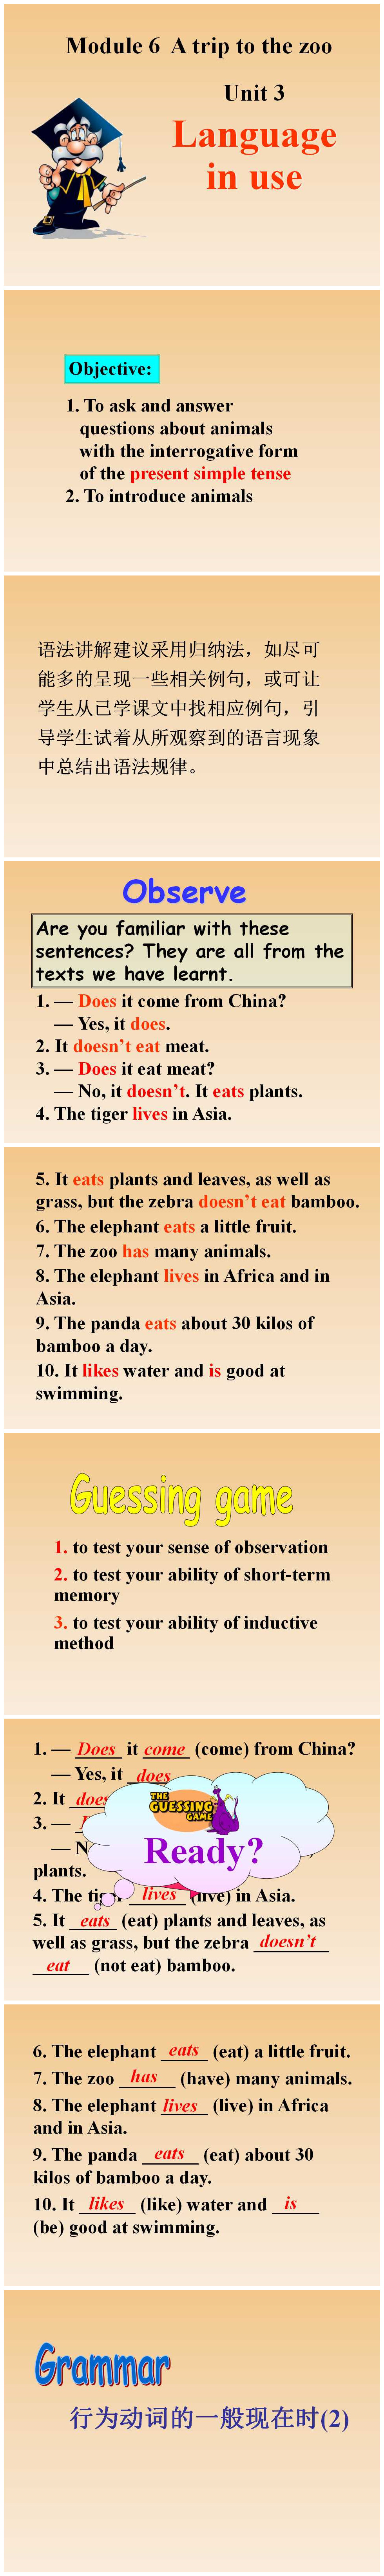 《Language in use》A trip to the zoo PPT课件3